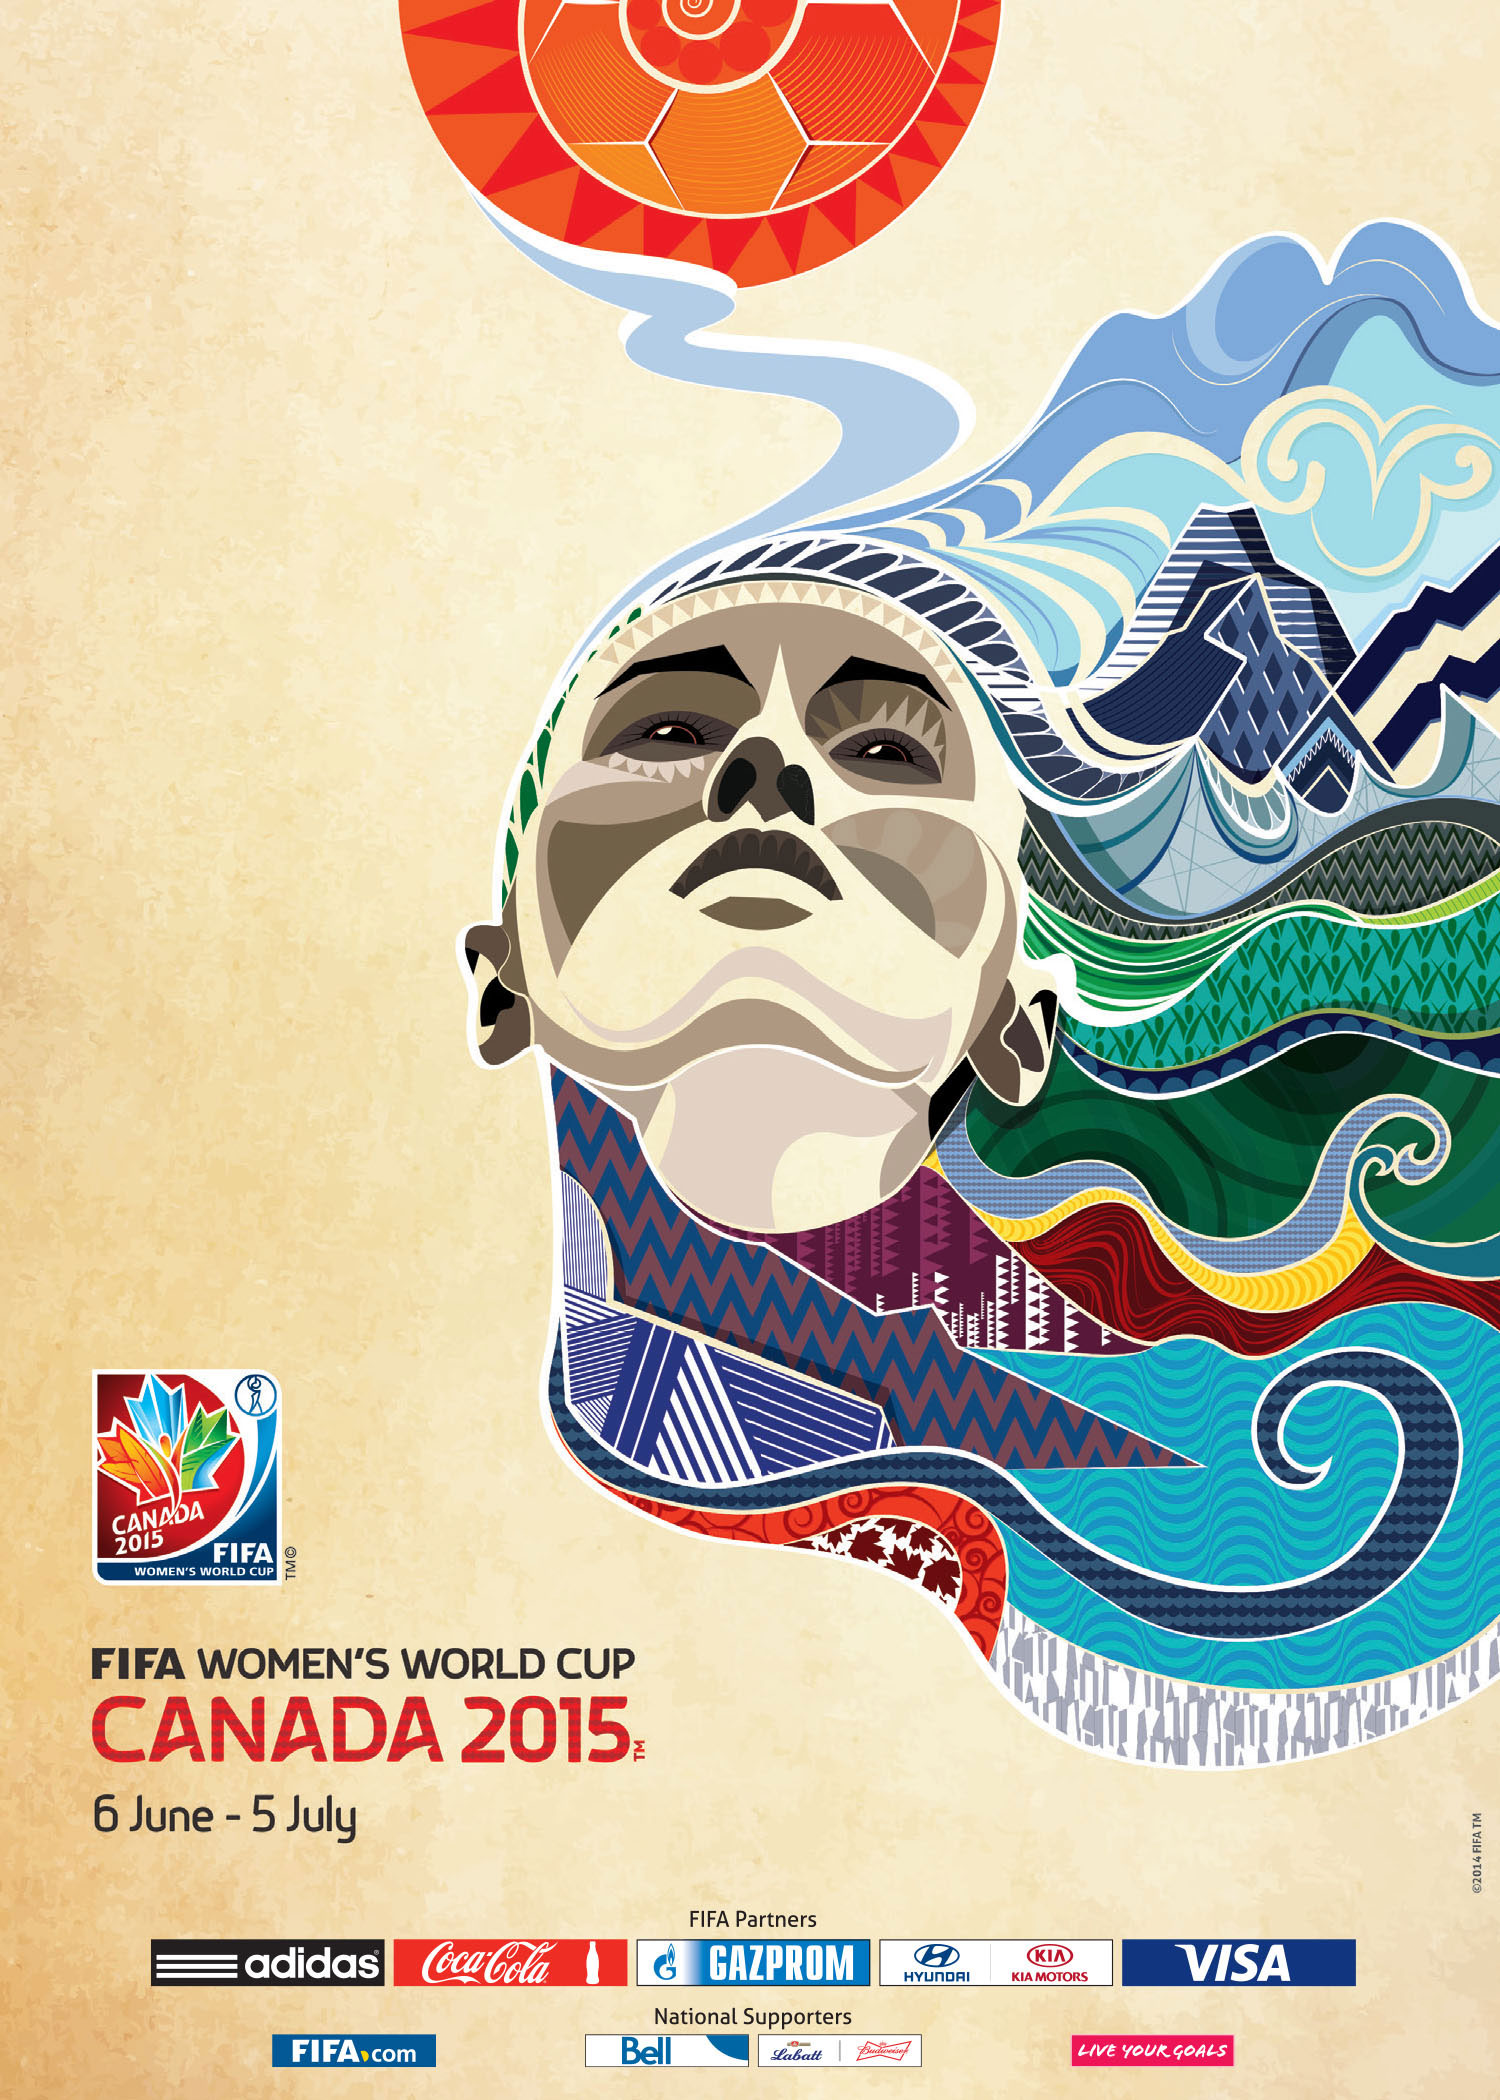 Canada 2015 official poster